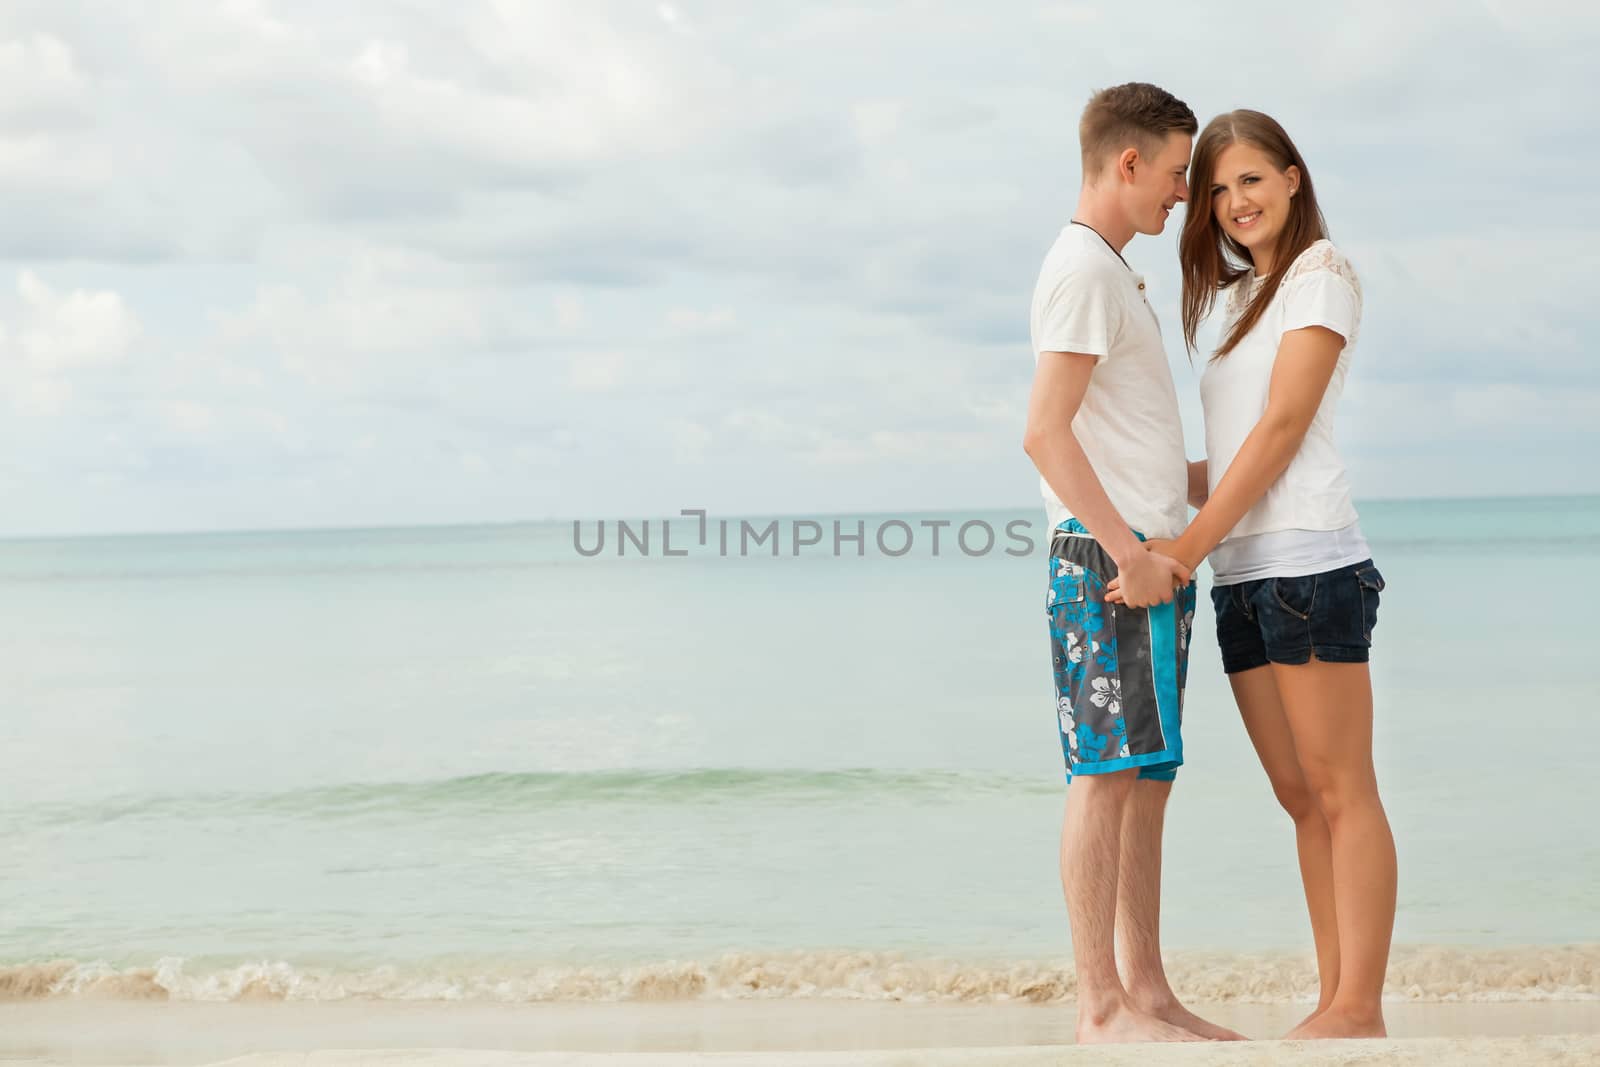 happy young couple on the beach in summer holiday love togetherness